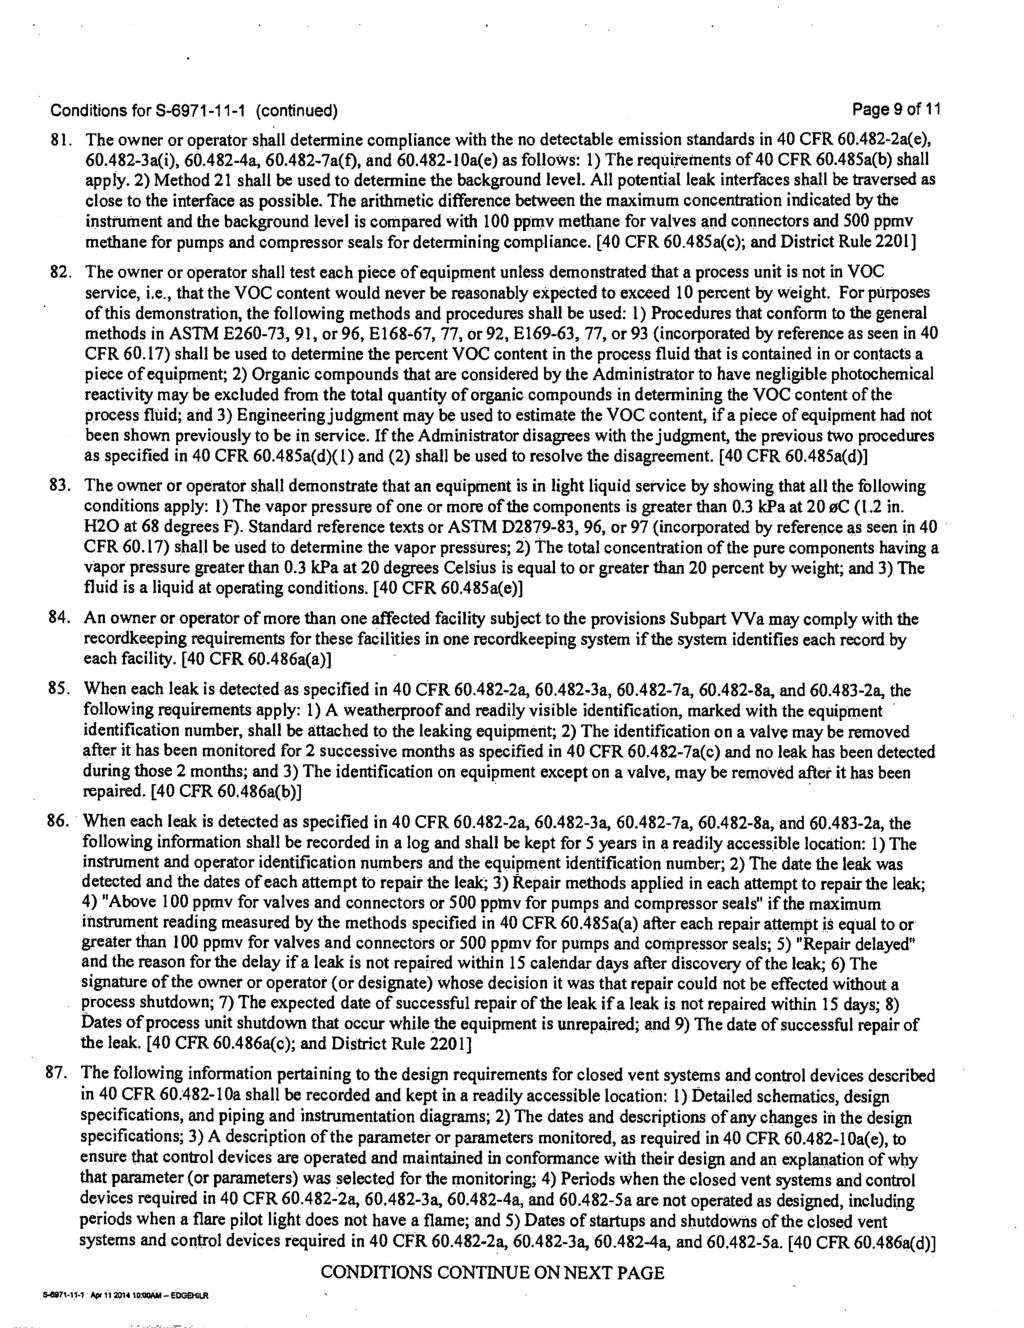 Conditions for S-6971-11-1 (continued) Page 9 of 11 81. The owner or operator shall determine compliance with the no detectable emission standards in 40 CFR 60.482-2a(e), 60.482-3a(i), 60.482-4a, 60.